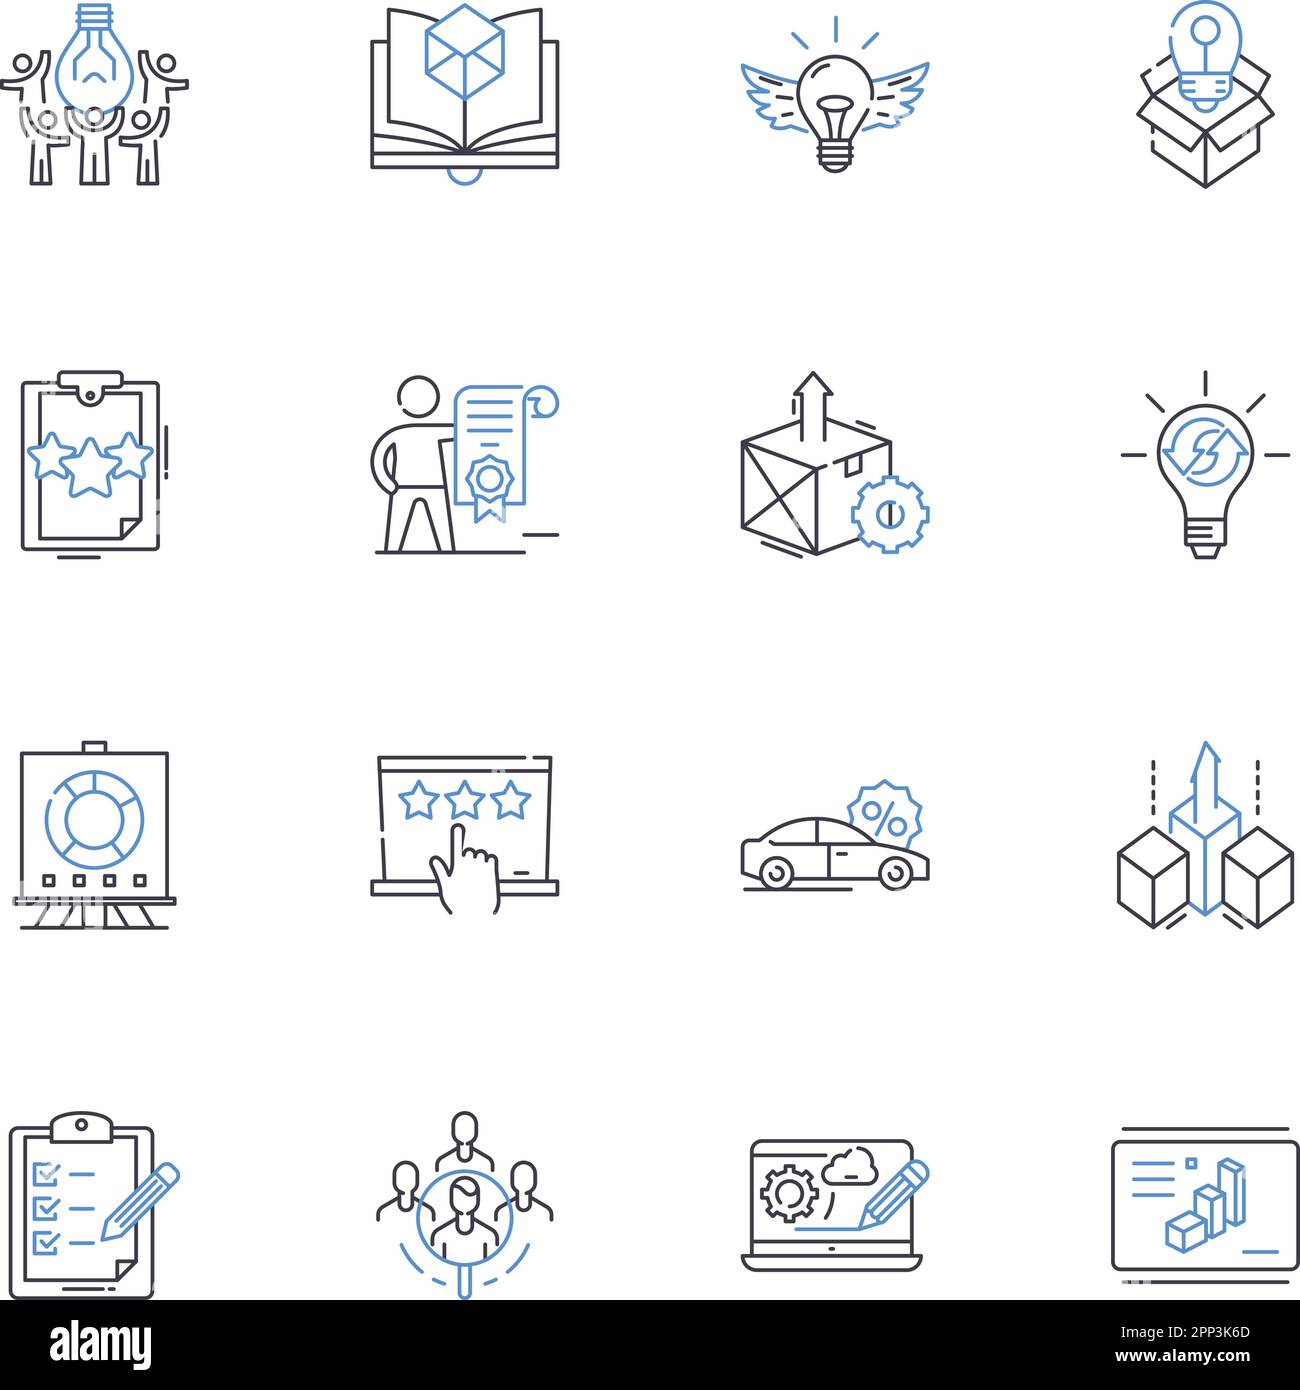 Email marketing line icons collection. Campaigns, Audience, Segmentation, Automation, Analytics, Opt-in, Deliverability vector and linear illustration Stock Vector